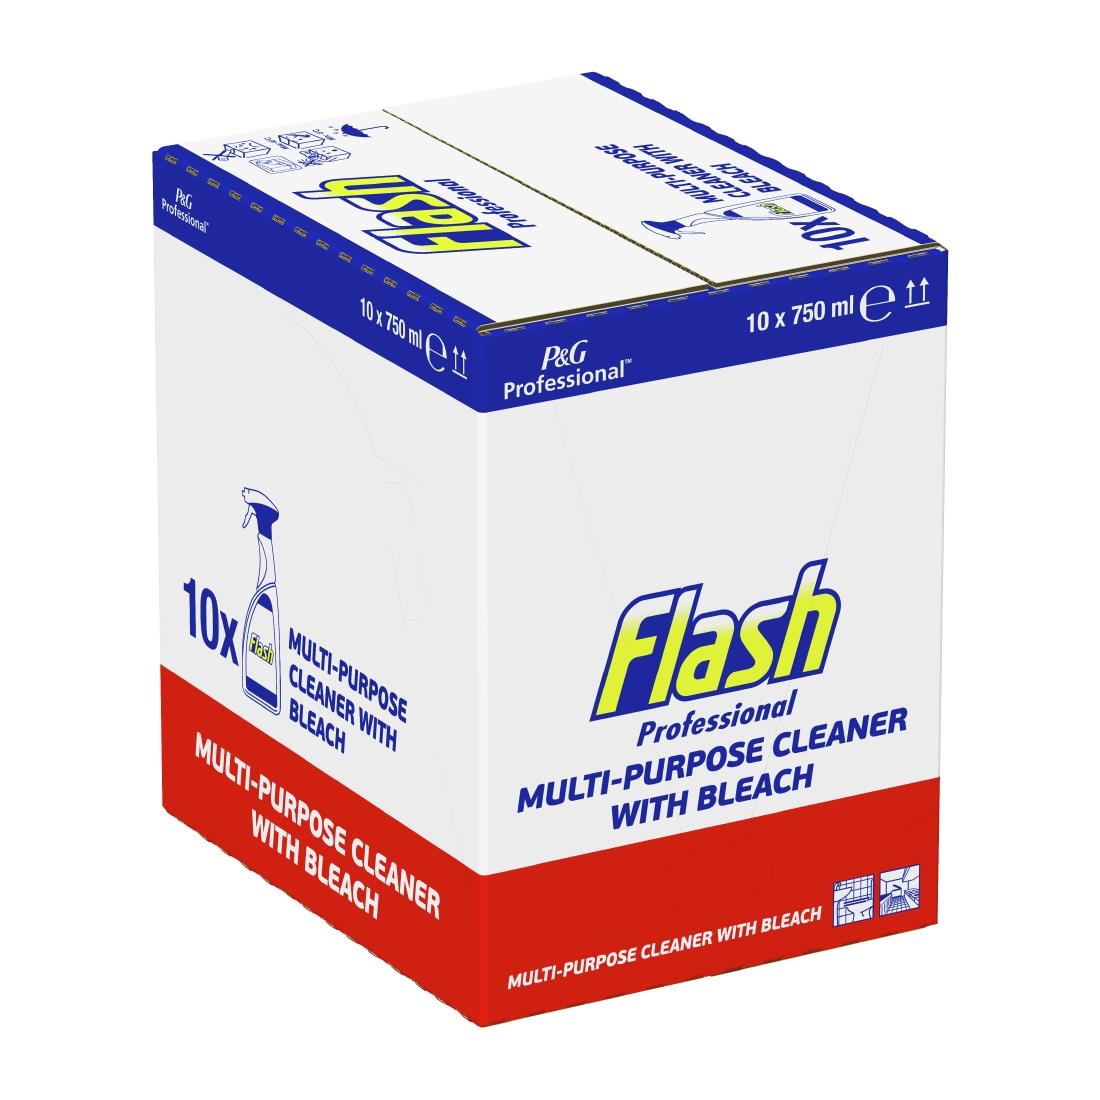 Flash Professional Multi-Purpose Cleaner With Bleach 750ml Pack of 10 (DX564)